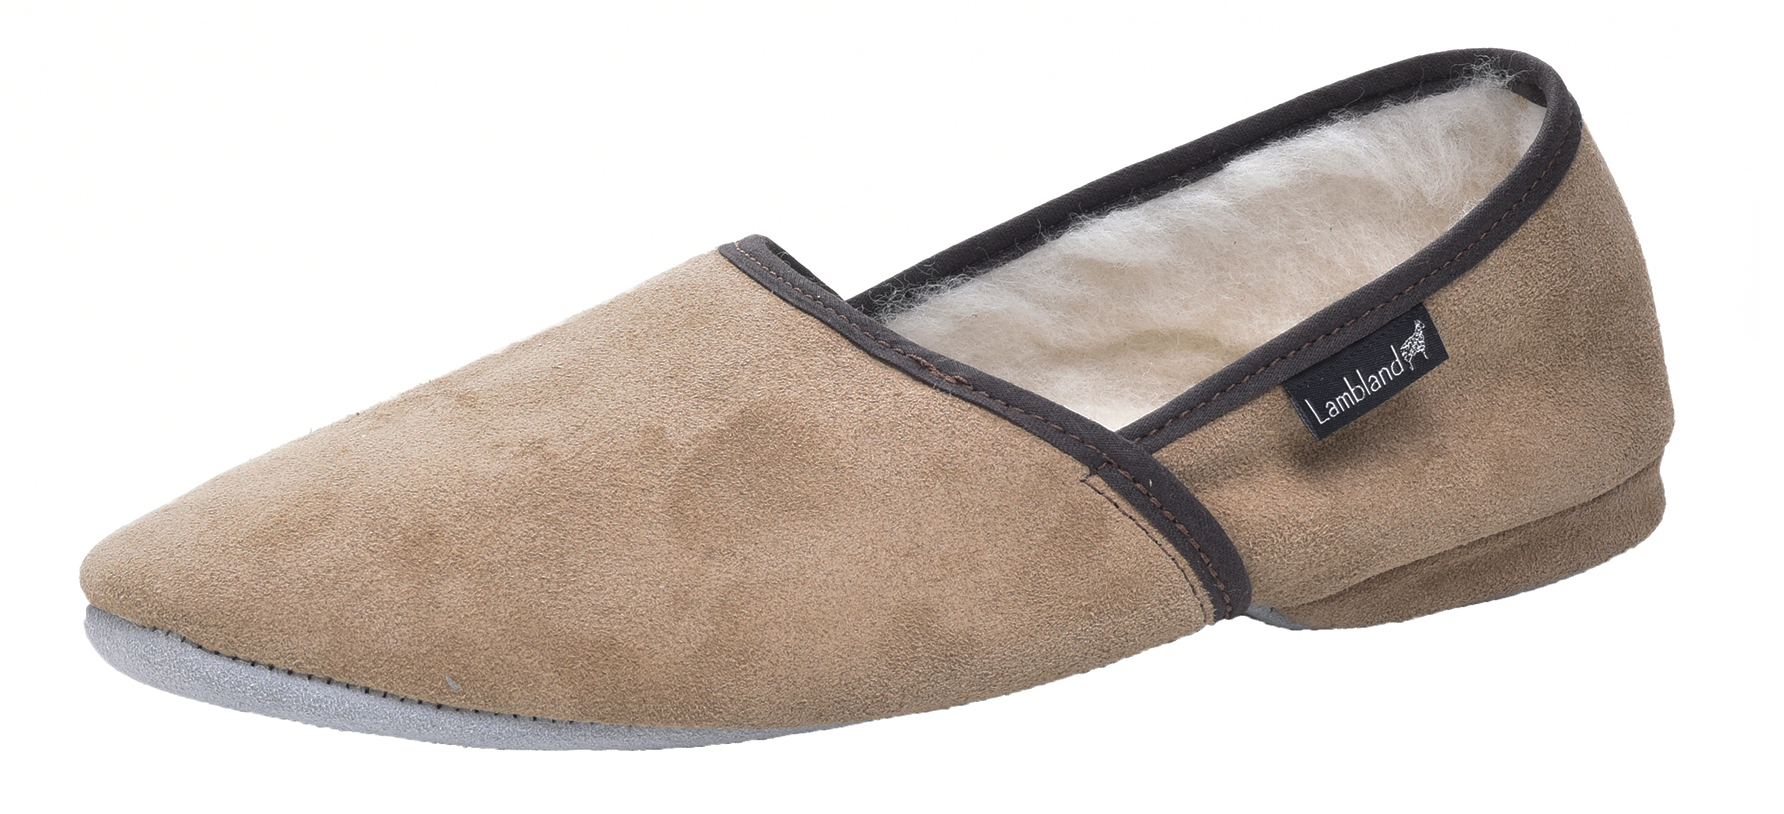 Mens Sheepskin Wool Slippers with Hard Suede Sole British Made by ...